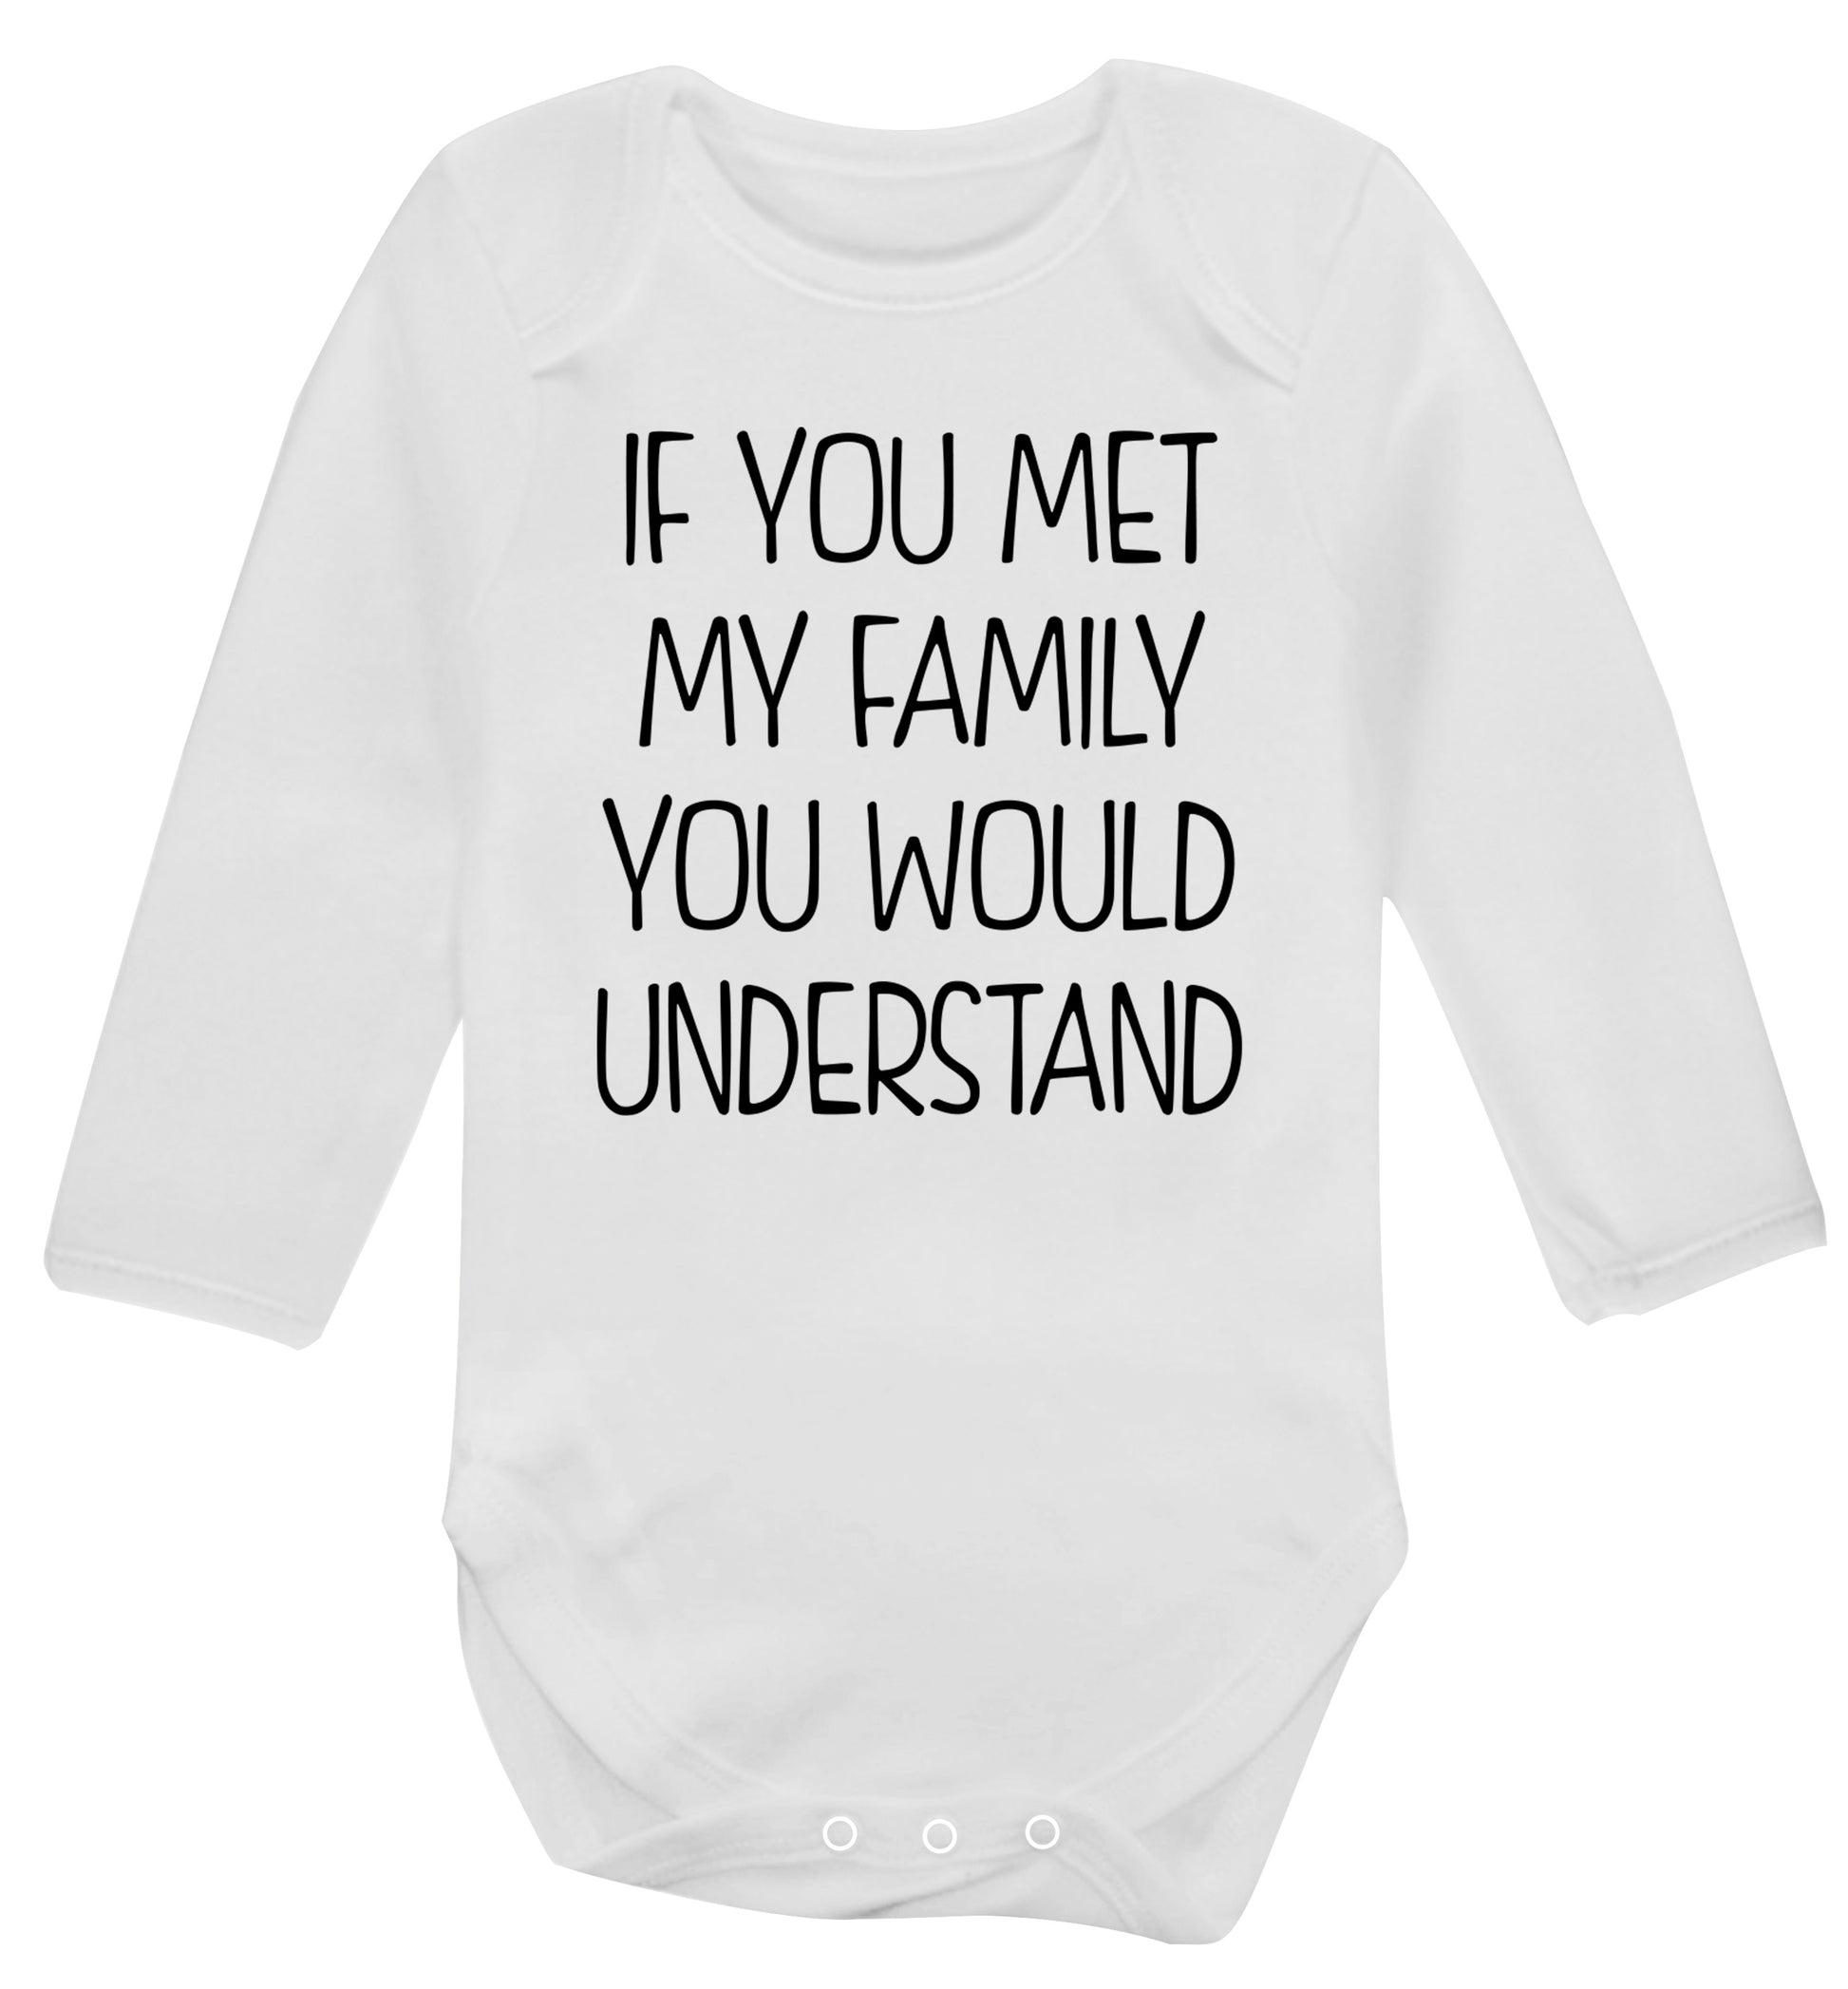 If you met my family you would understand Baby Vest long sleeved white 6-12 months